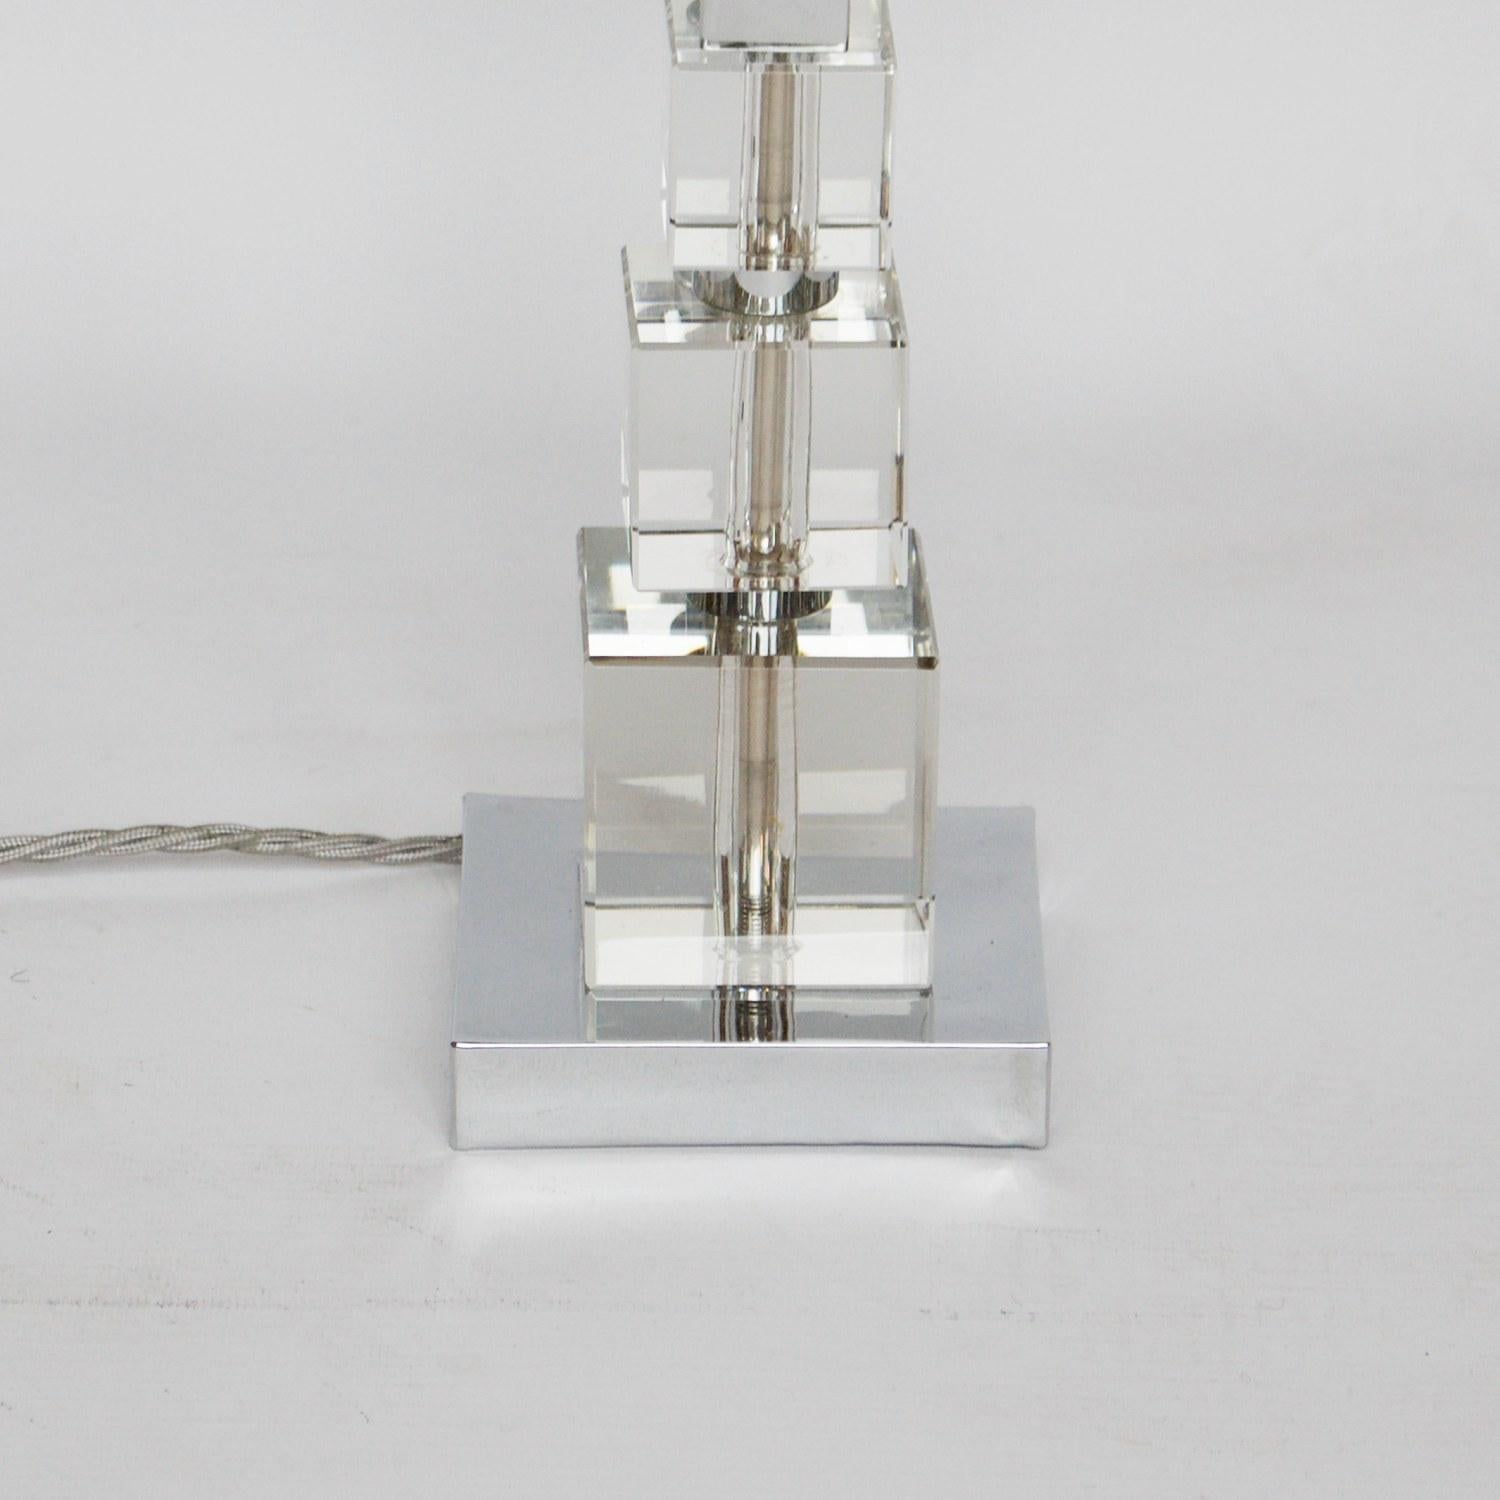 Art Deco table lamp with iceberg white glass shade and glass cubed stem set over a chromed metal base. 

Dimensions: H 44cm diameter of base, 10cm of shade, 11cm 

Origin: English

Date: circa 1930

Item Number: 1106203

All of our